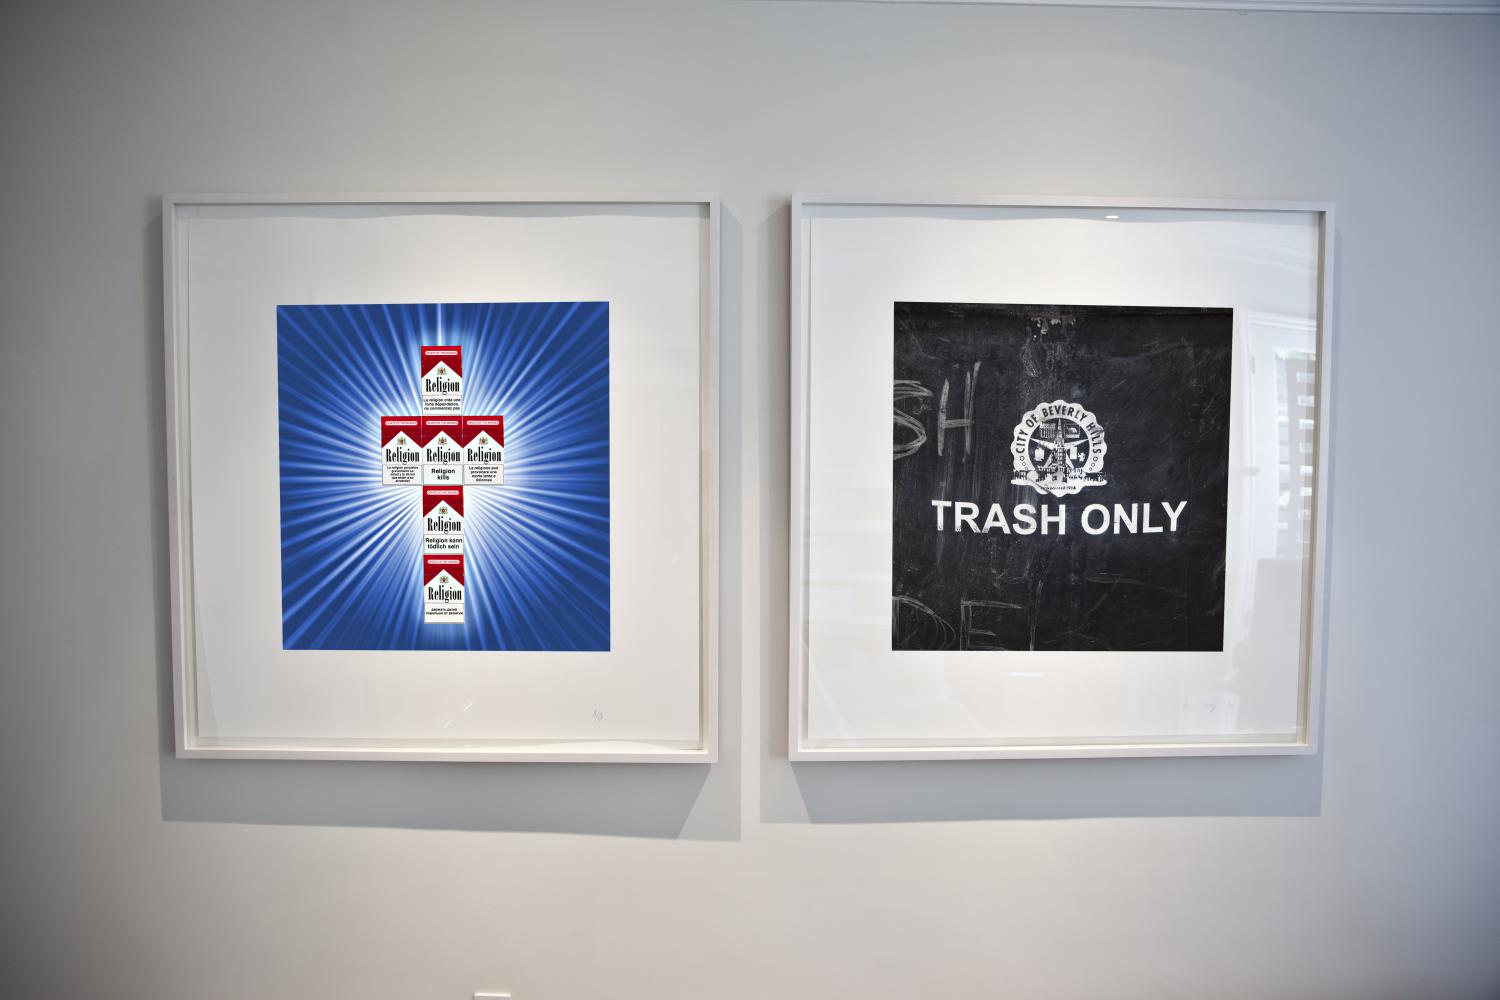 Religion + Beverly Hills; Trash Only - 20"x20" $600 each